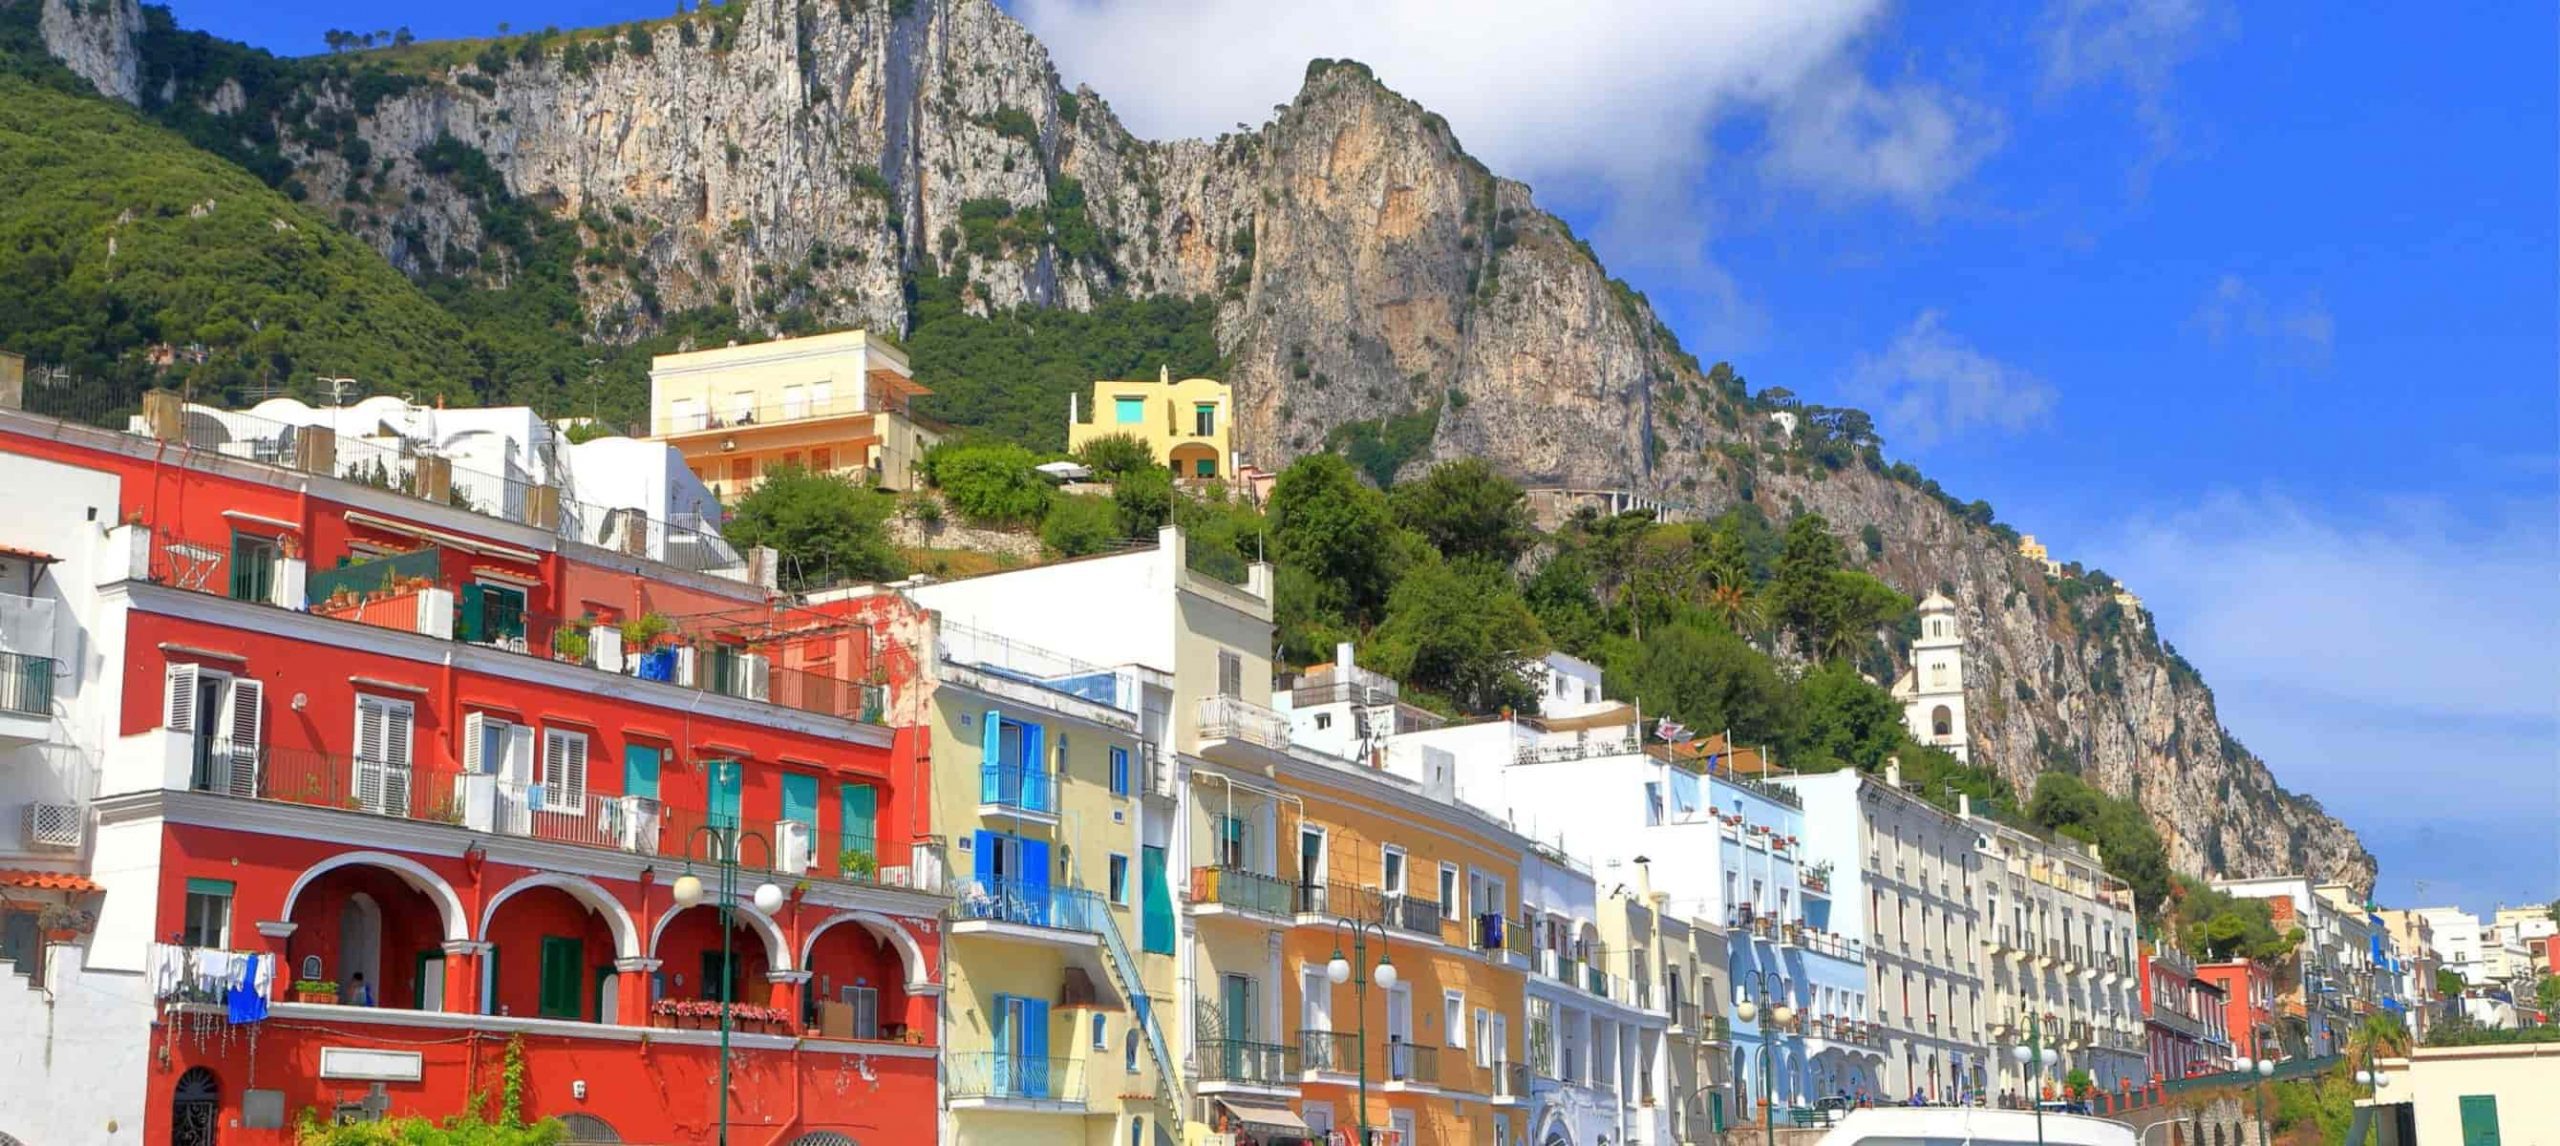 How To Travel From Rome To Capri: 3 Ways